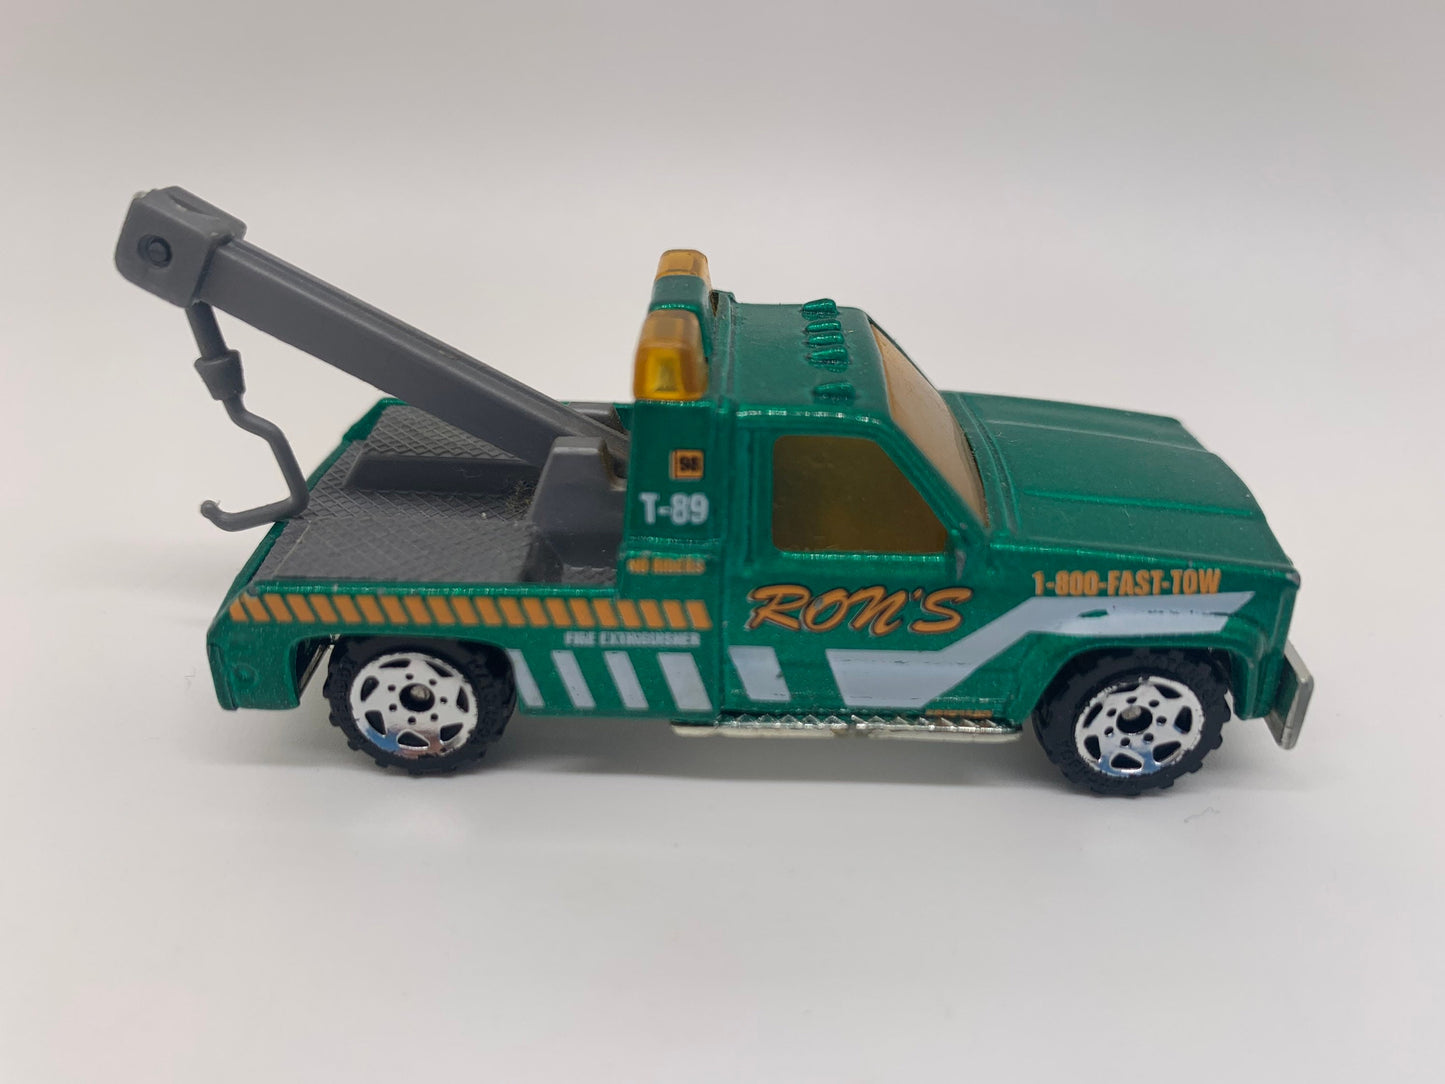 Matchbox GMC Wrecker Metalflake Green Police Patrol Perfect Birthday Gift Miniature Collectable Model Toy Car